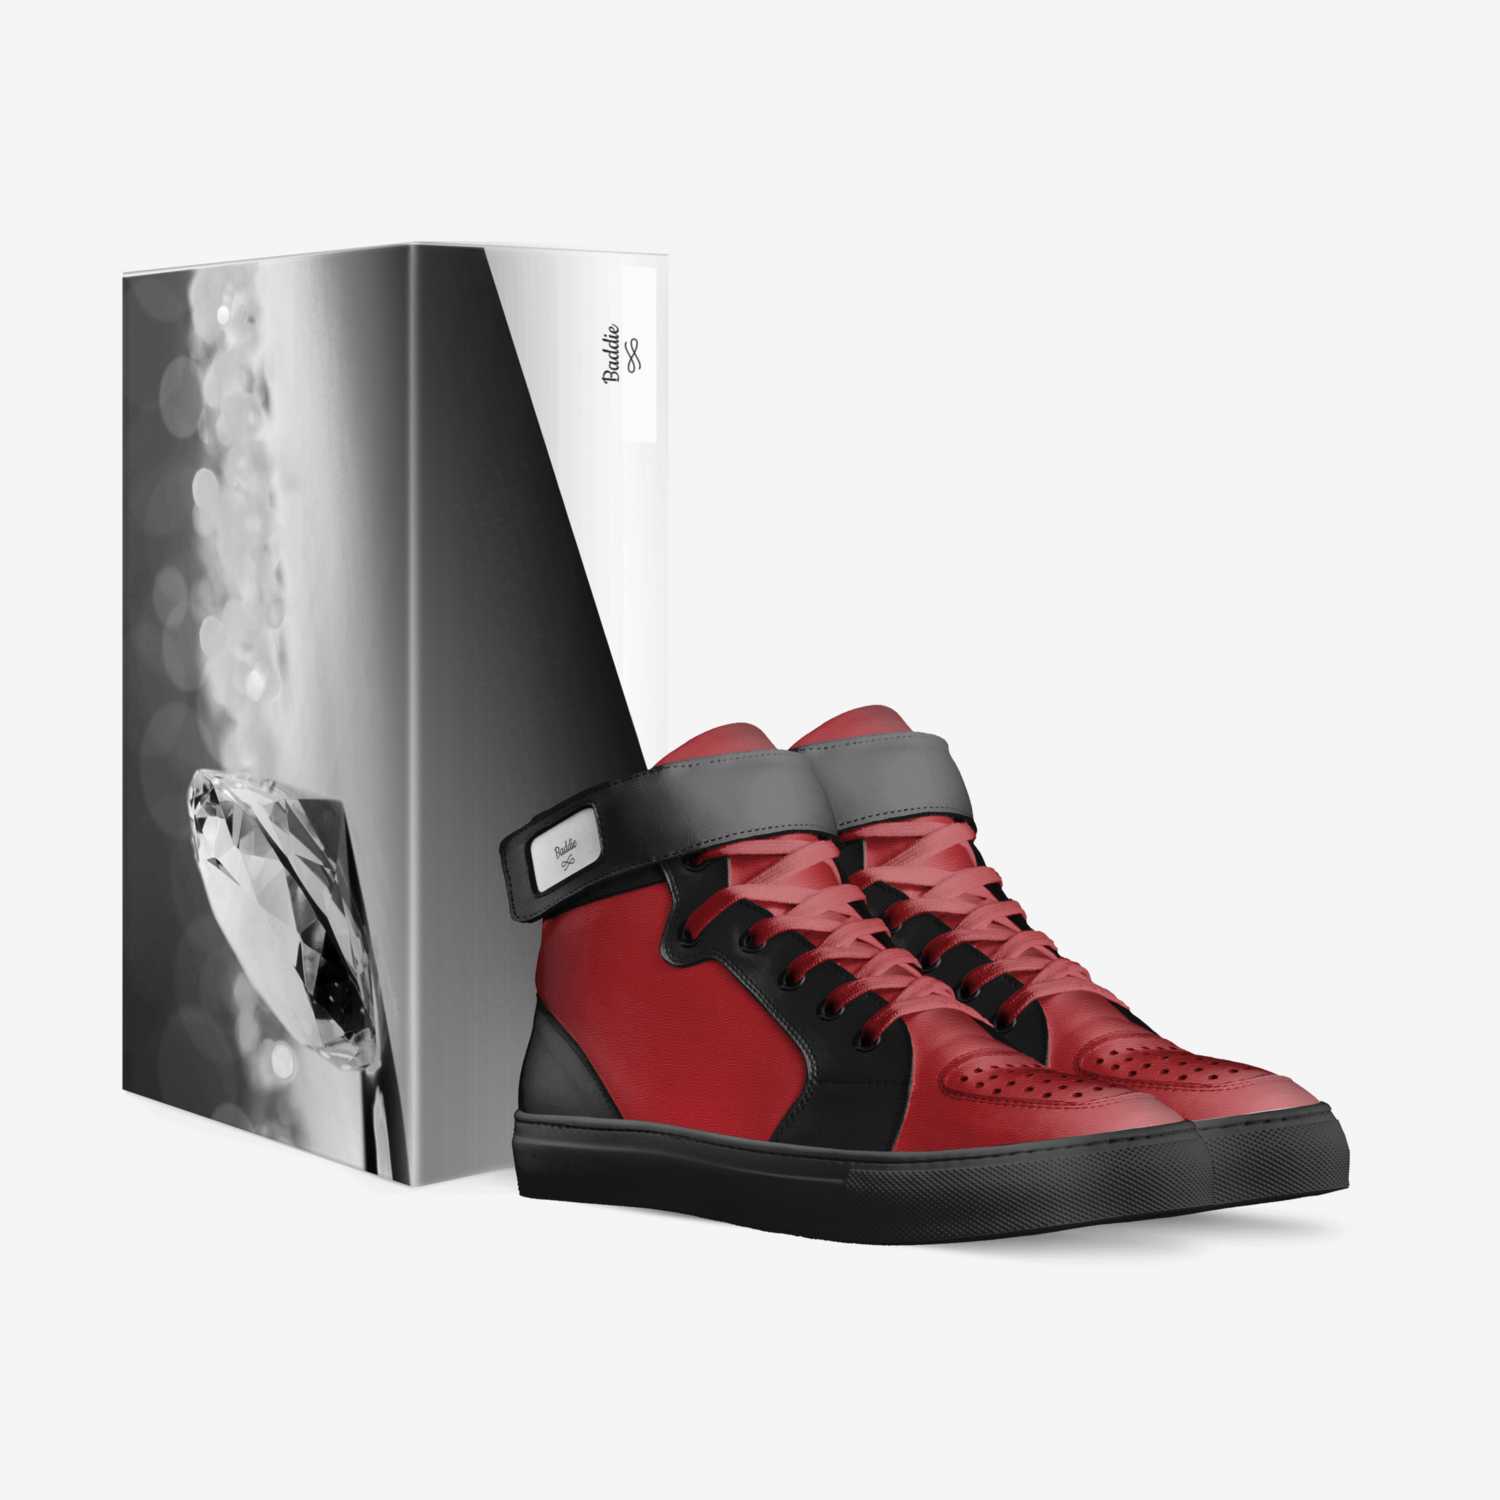 Baddie custom made in Italy shoes by Cameron Jones | Box view